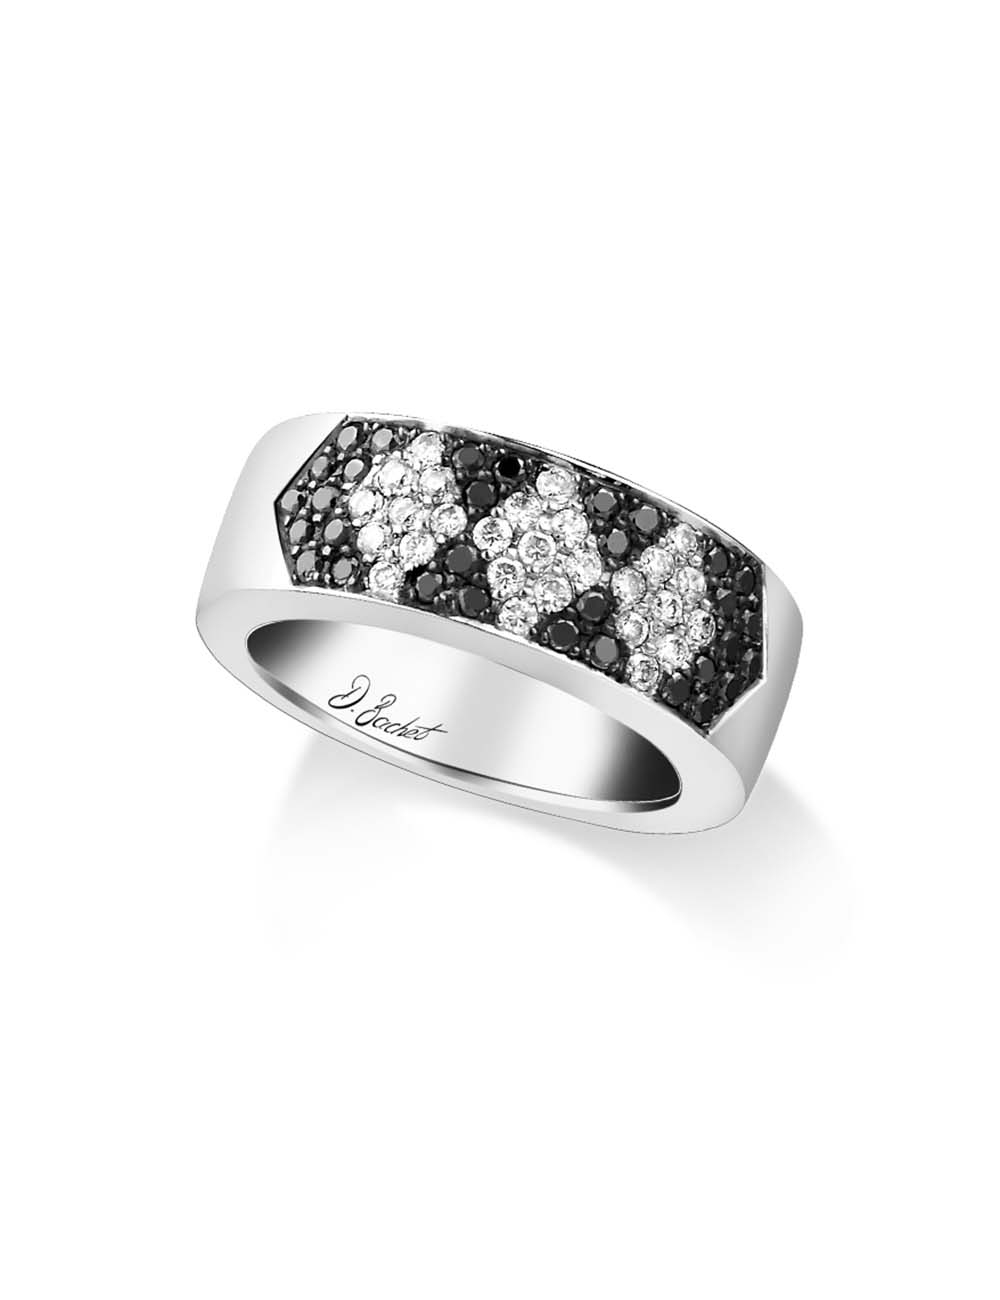 Luxury and bold wedding ring for women in platinum, black and white diamonds